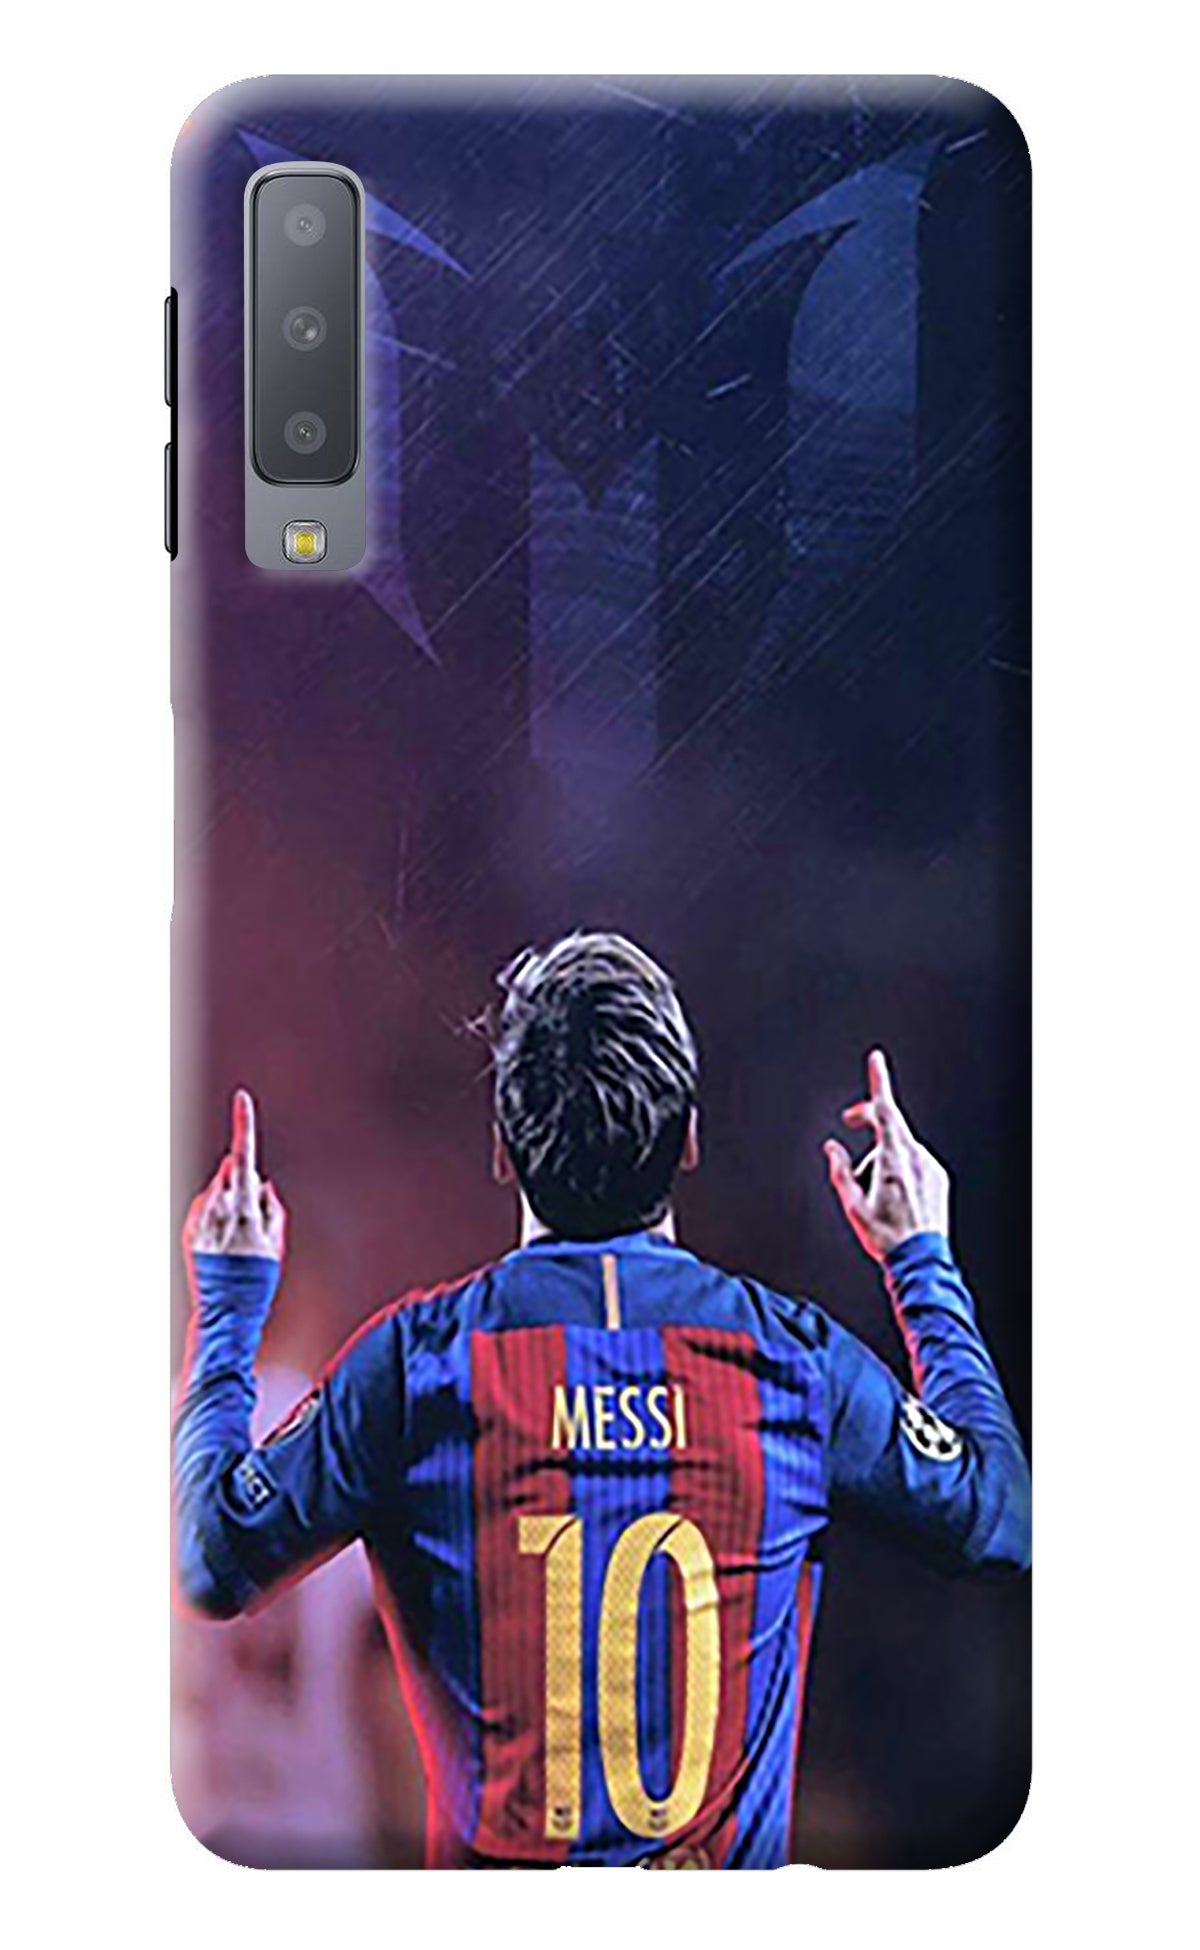 Messi Samsung A7 Back Cover